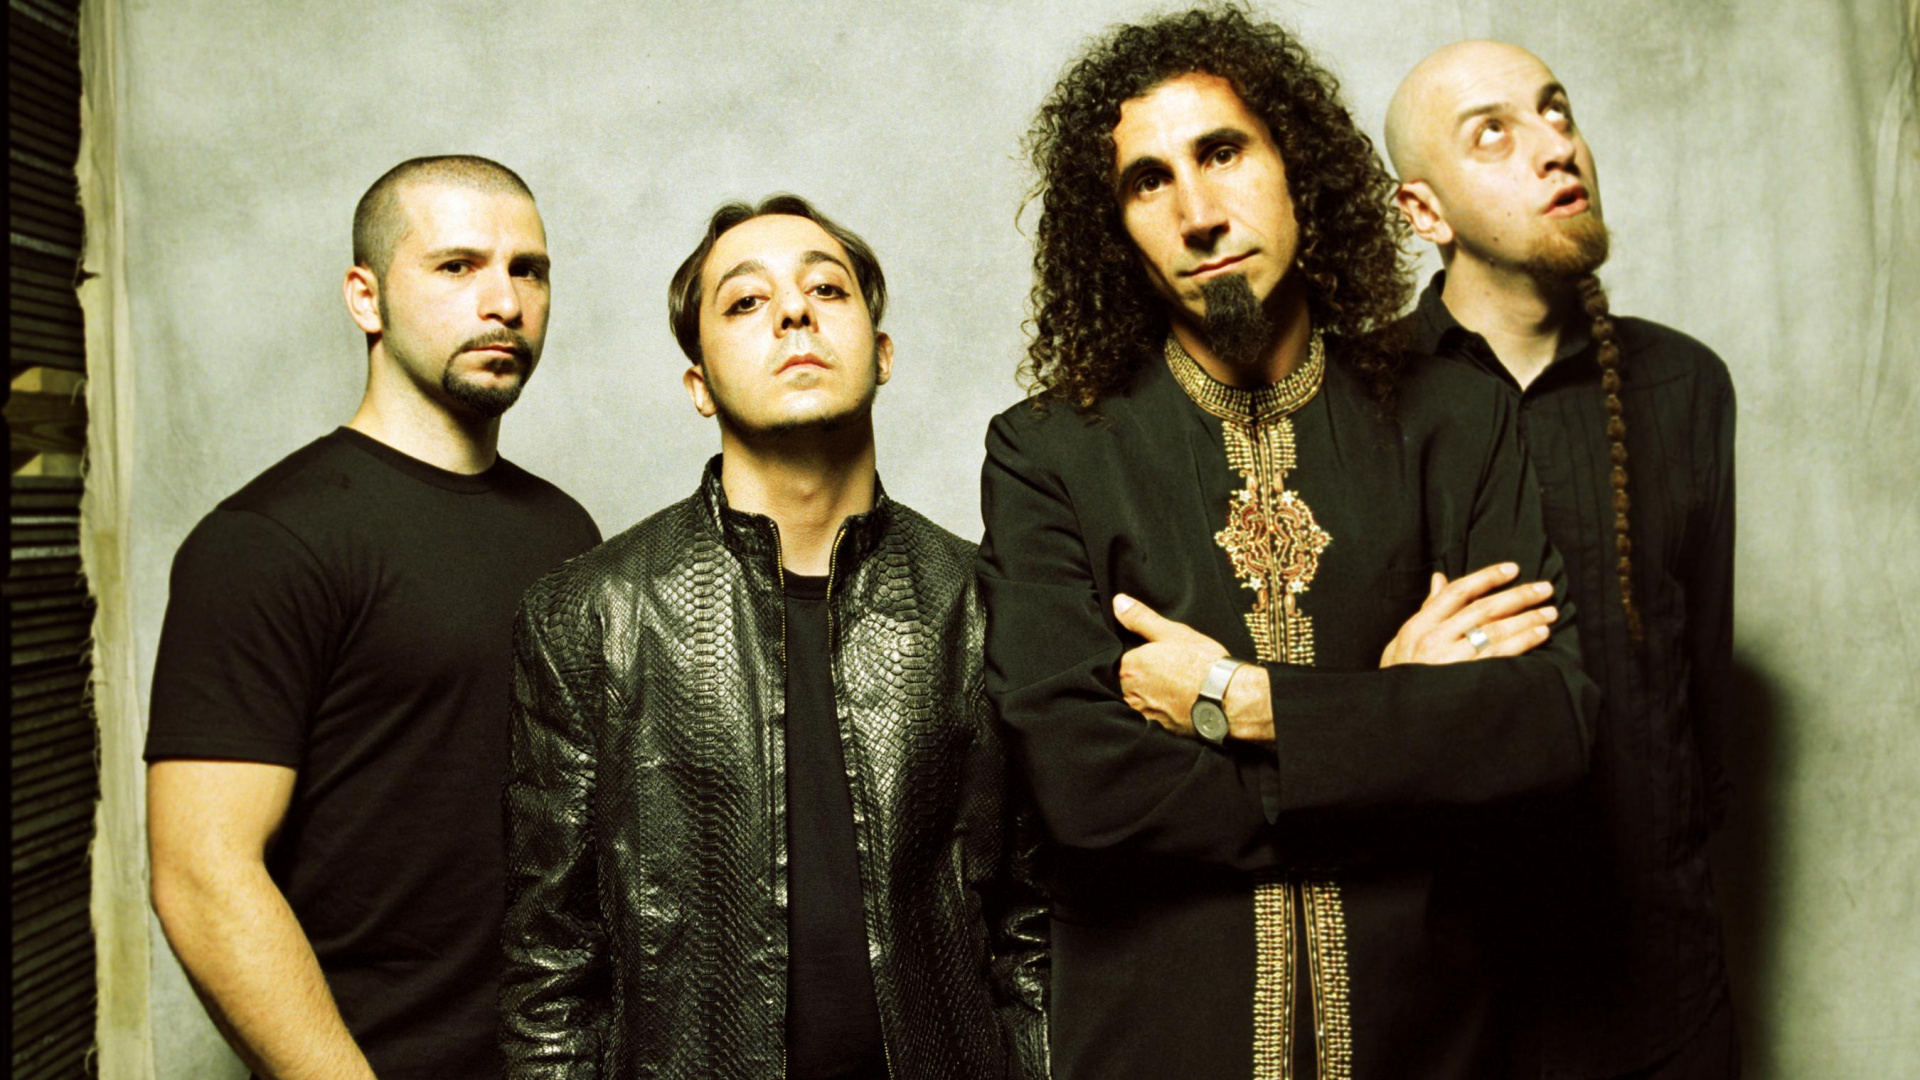 System Of A Down, Heavy Metal, Social Group, Fun, Event. Wallpaper in 1920x1080 Resolution